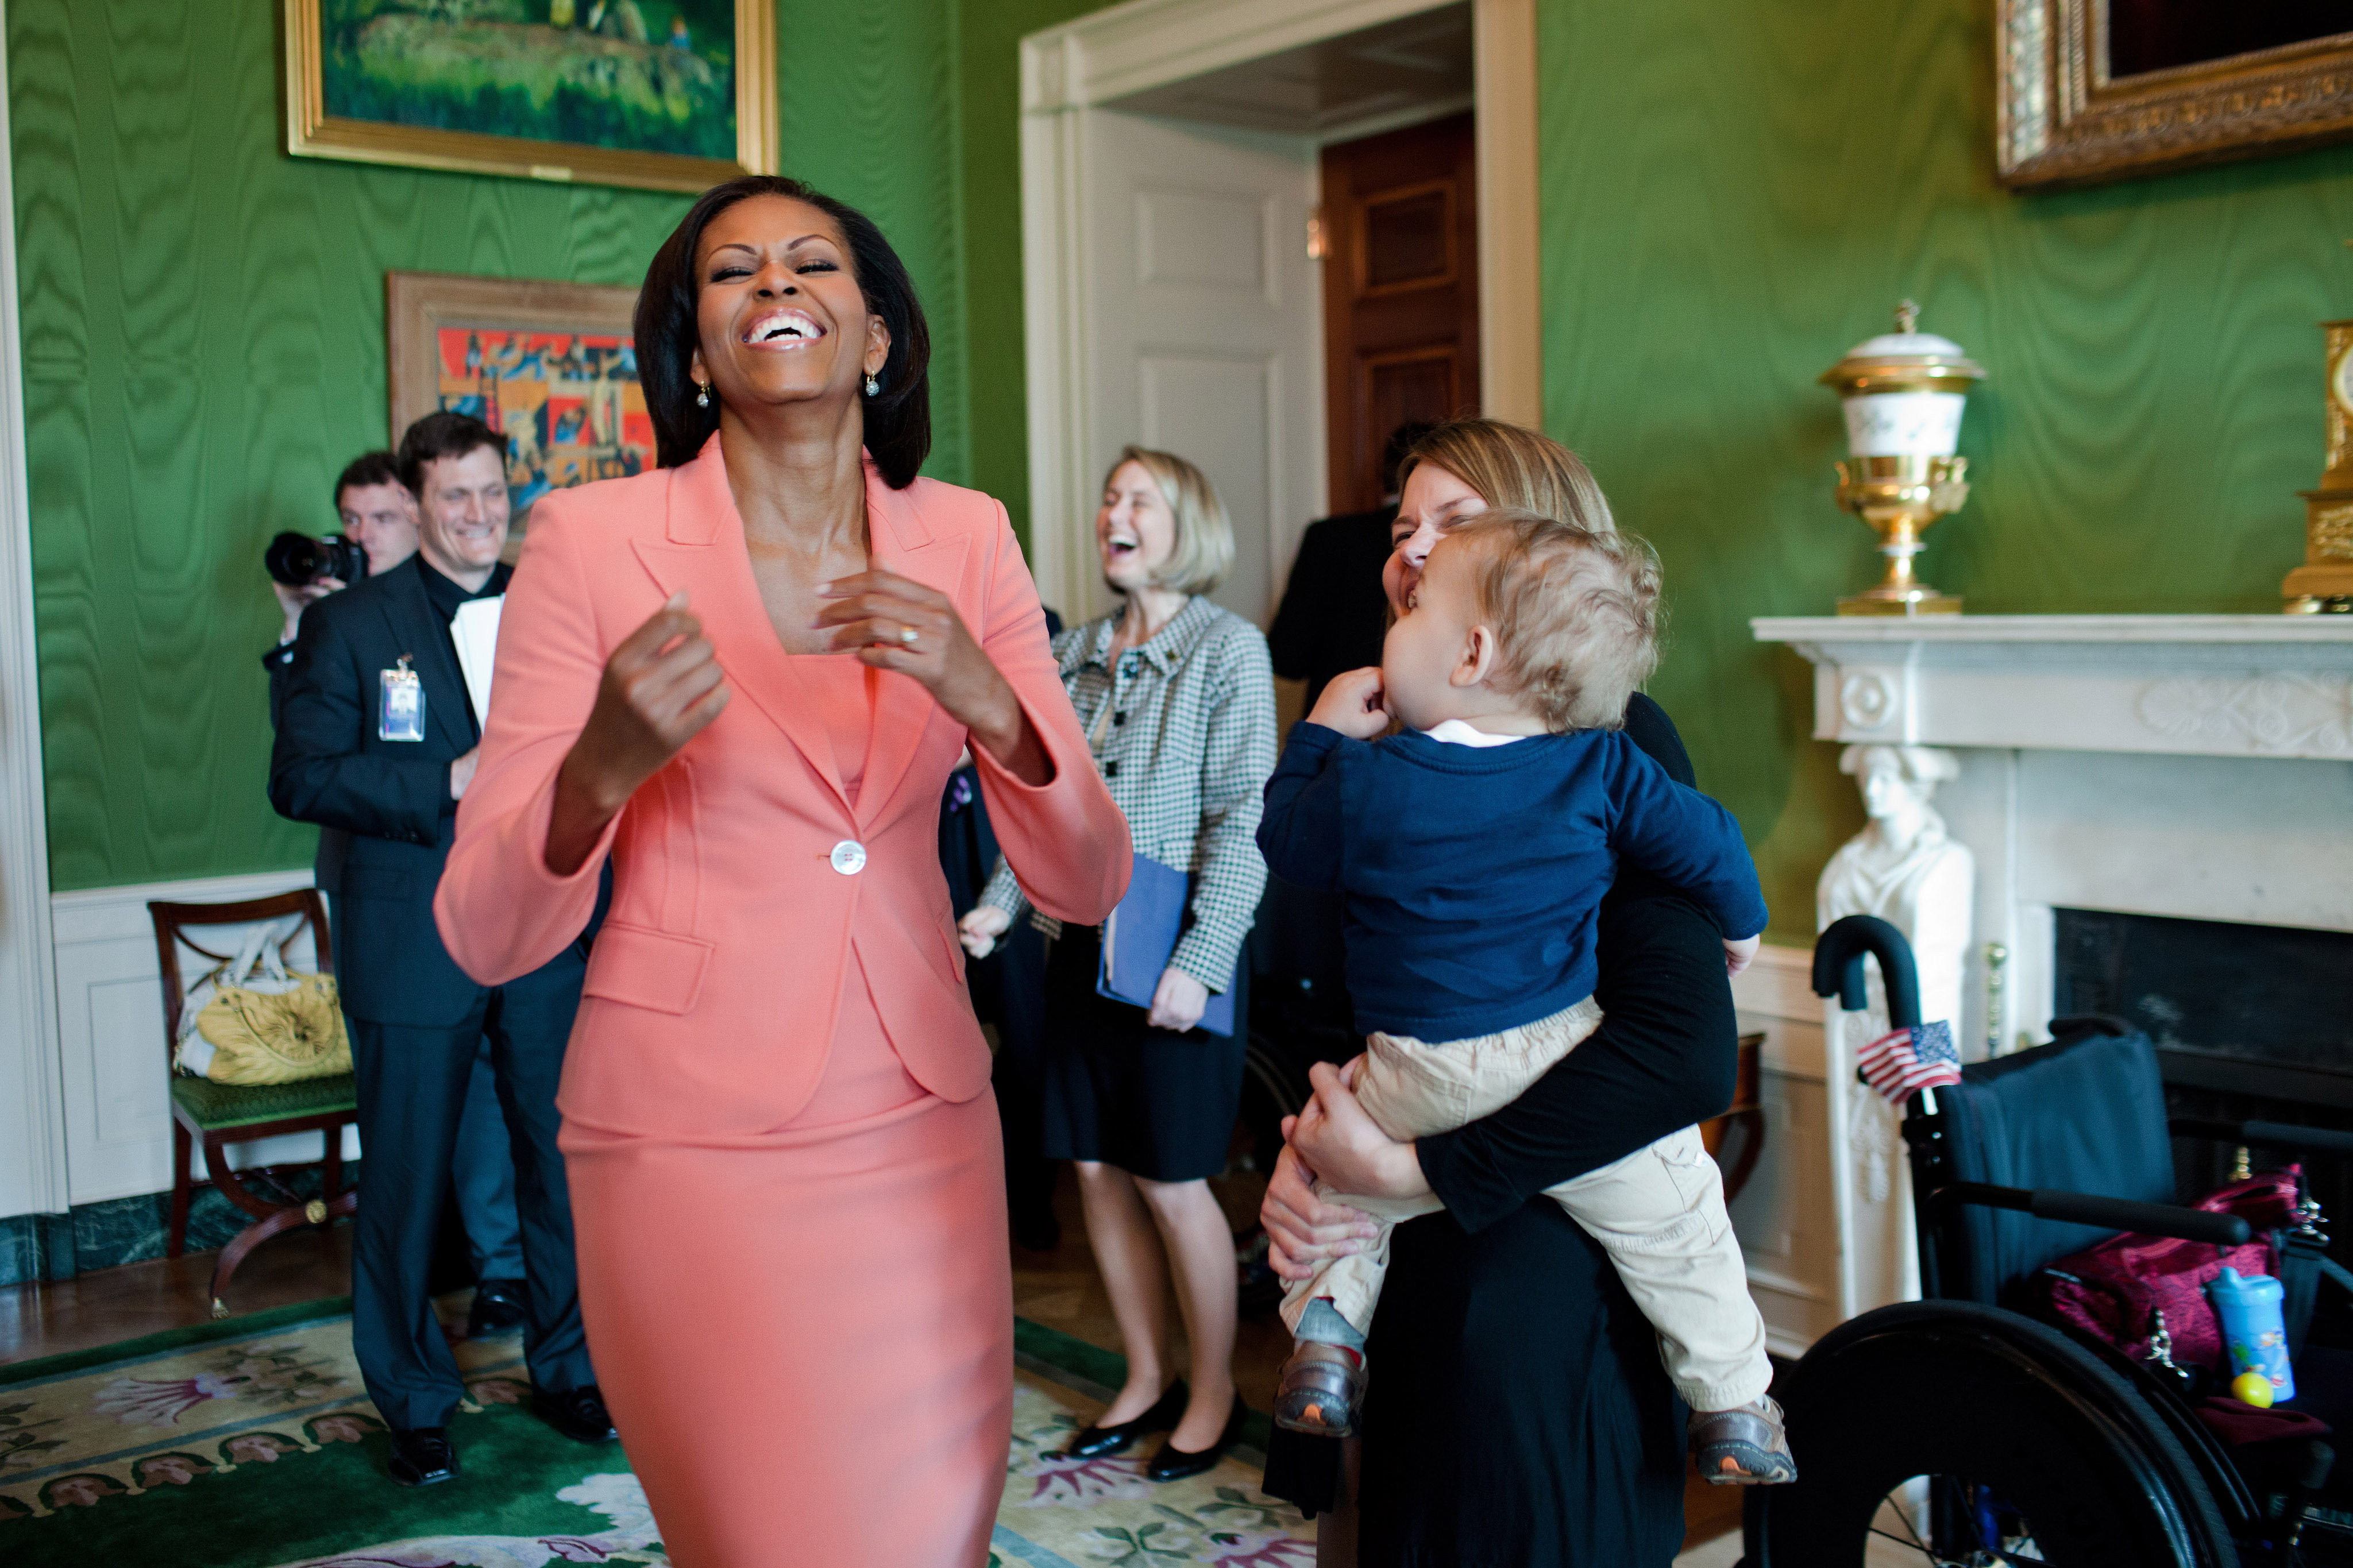 Michelle Obama laughs in the Green Room of the White House, 2011